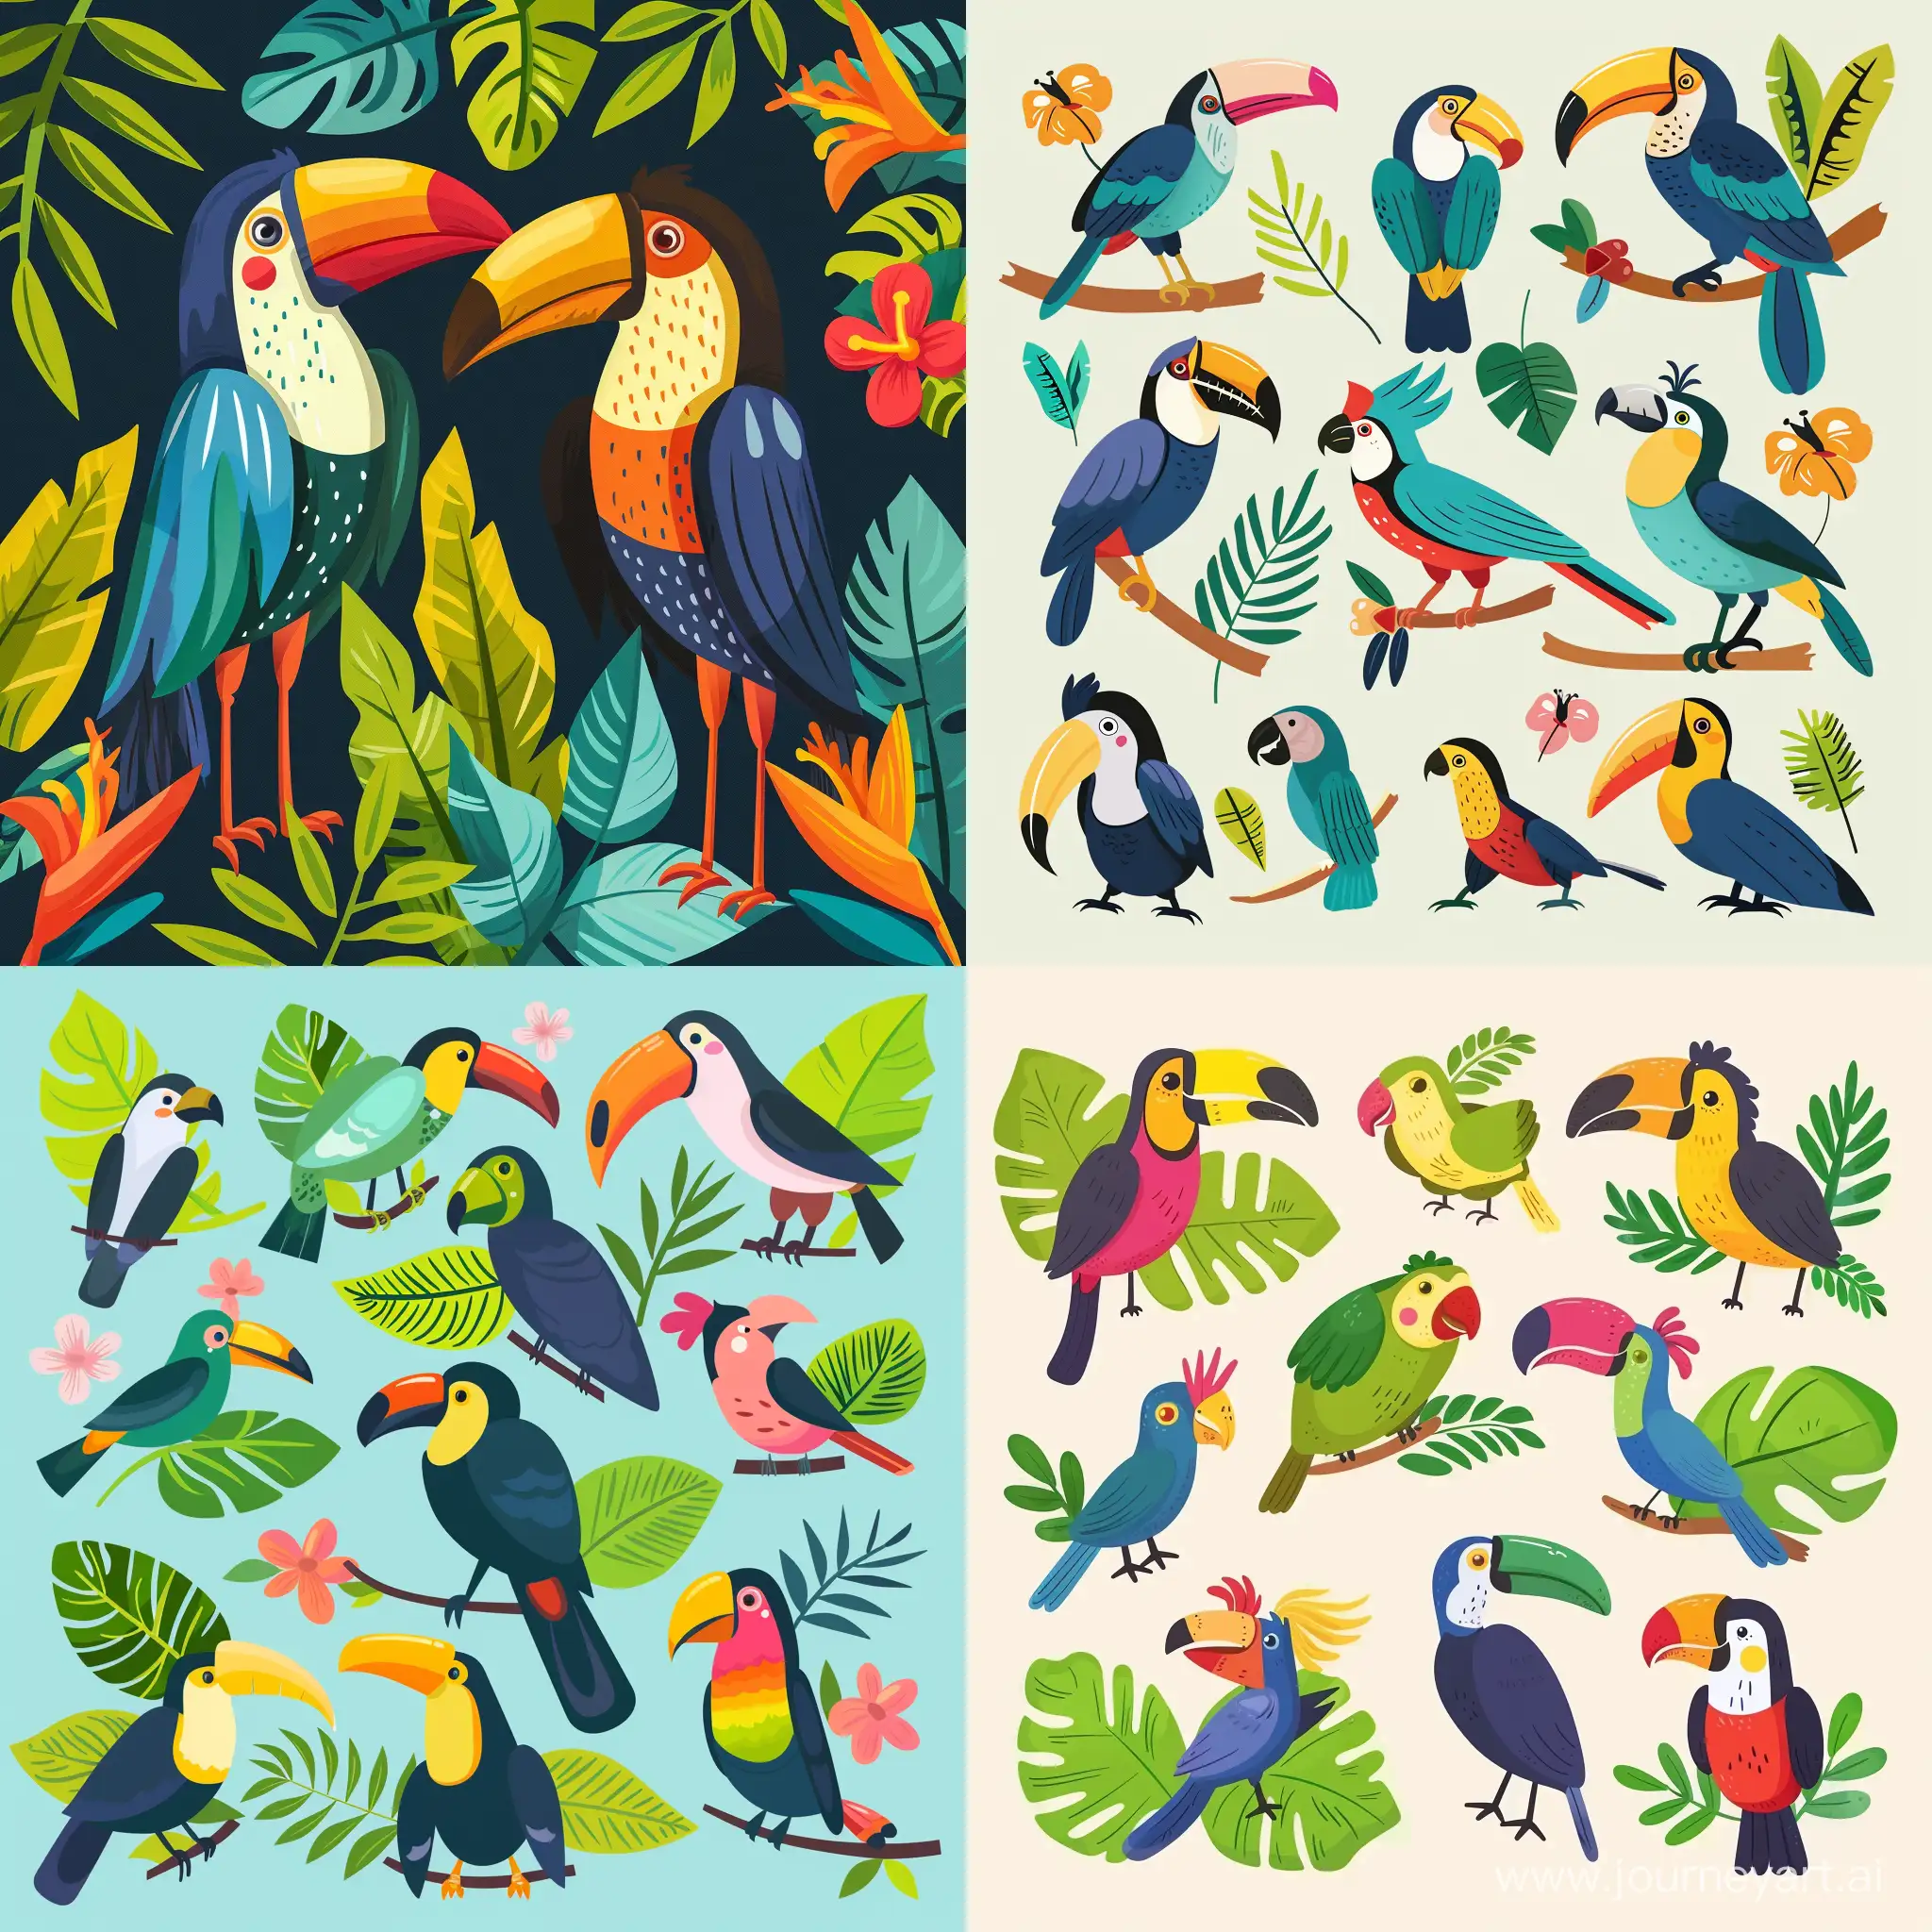 Colorful-Cartoon-Illustration-of-Tropical-Birds-in-Flat-Style